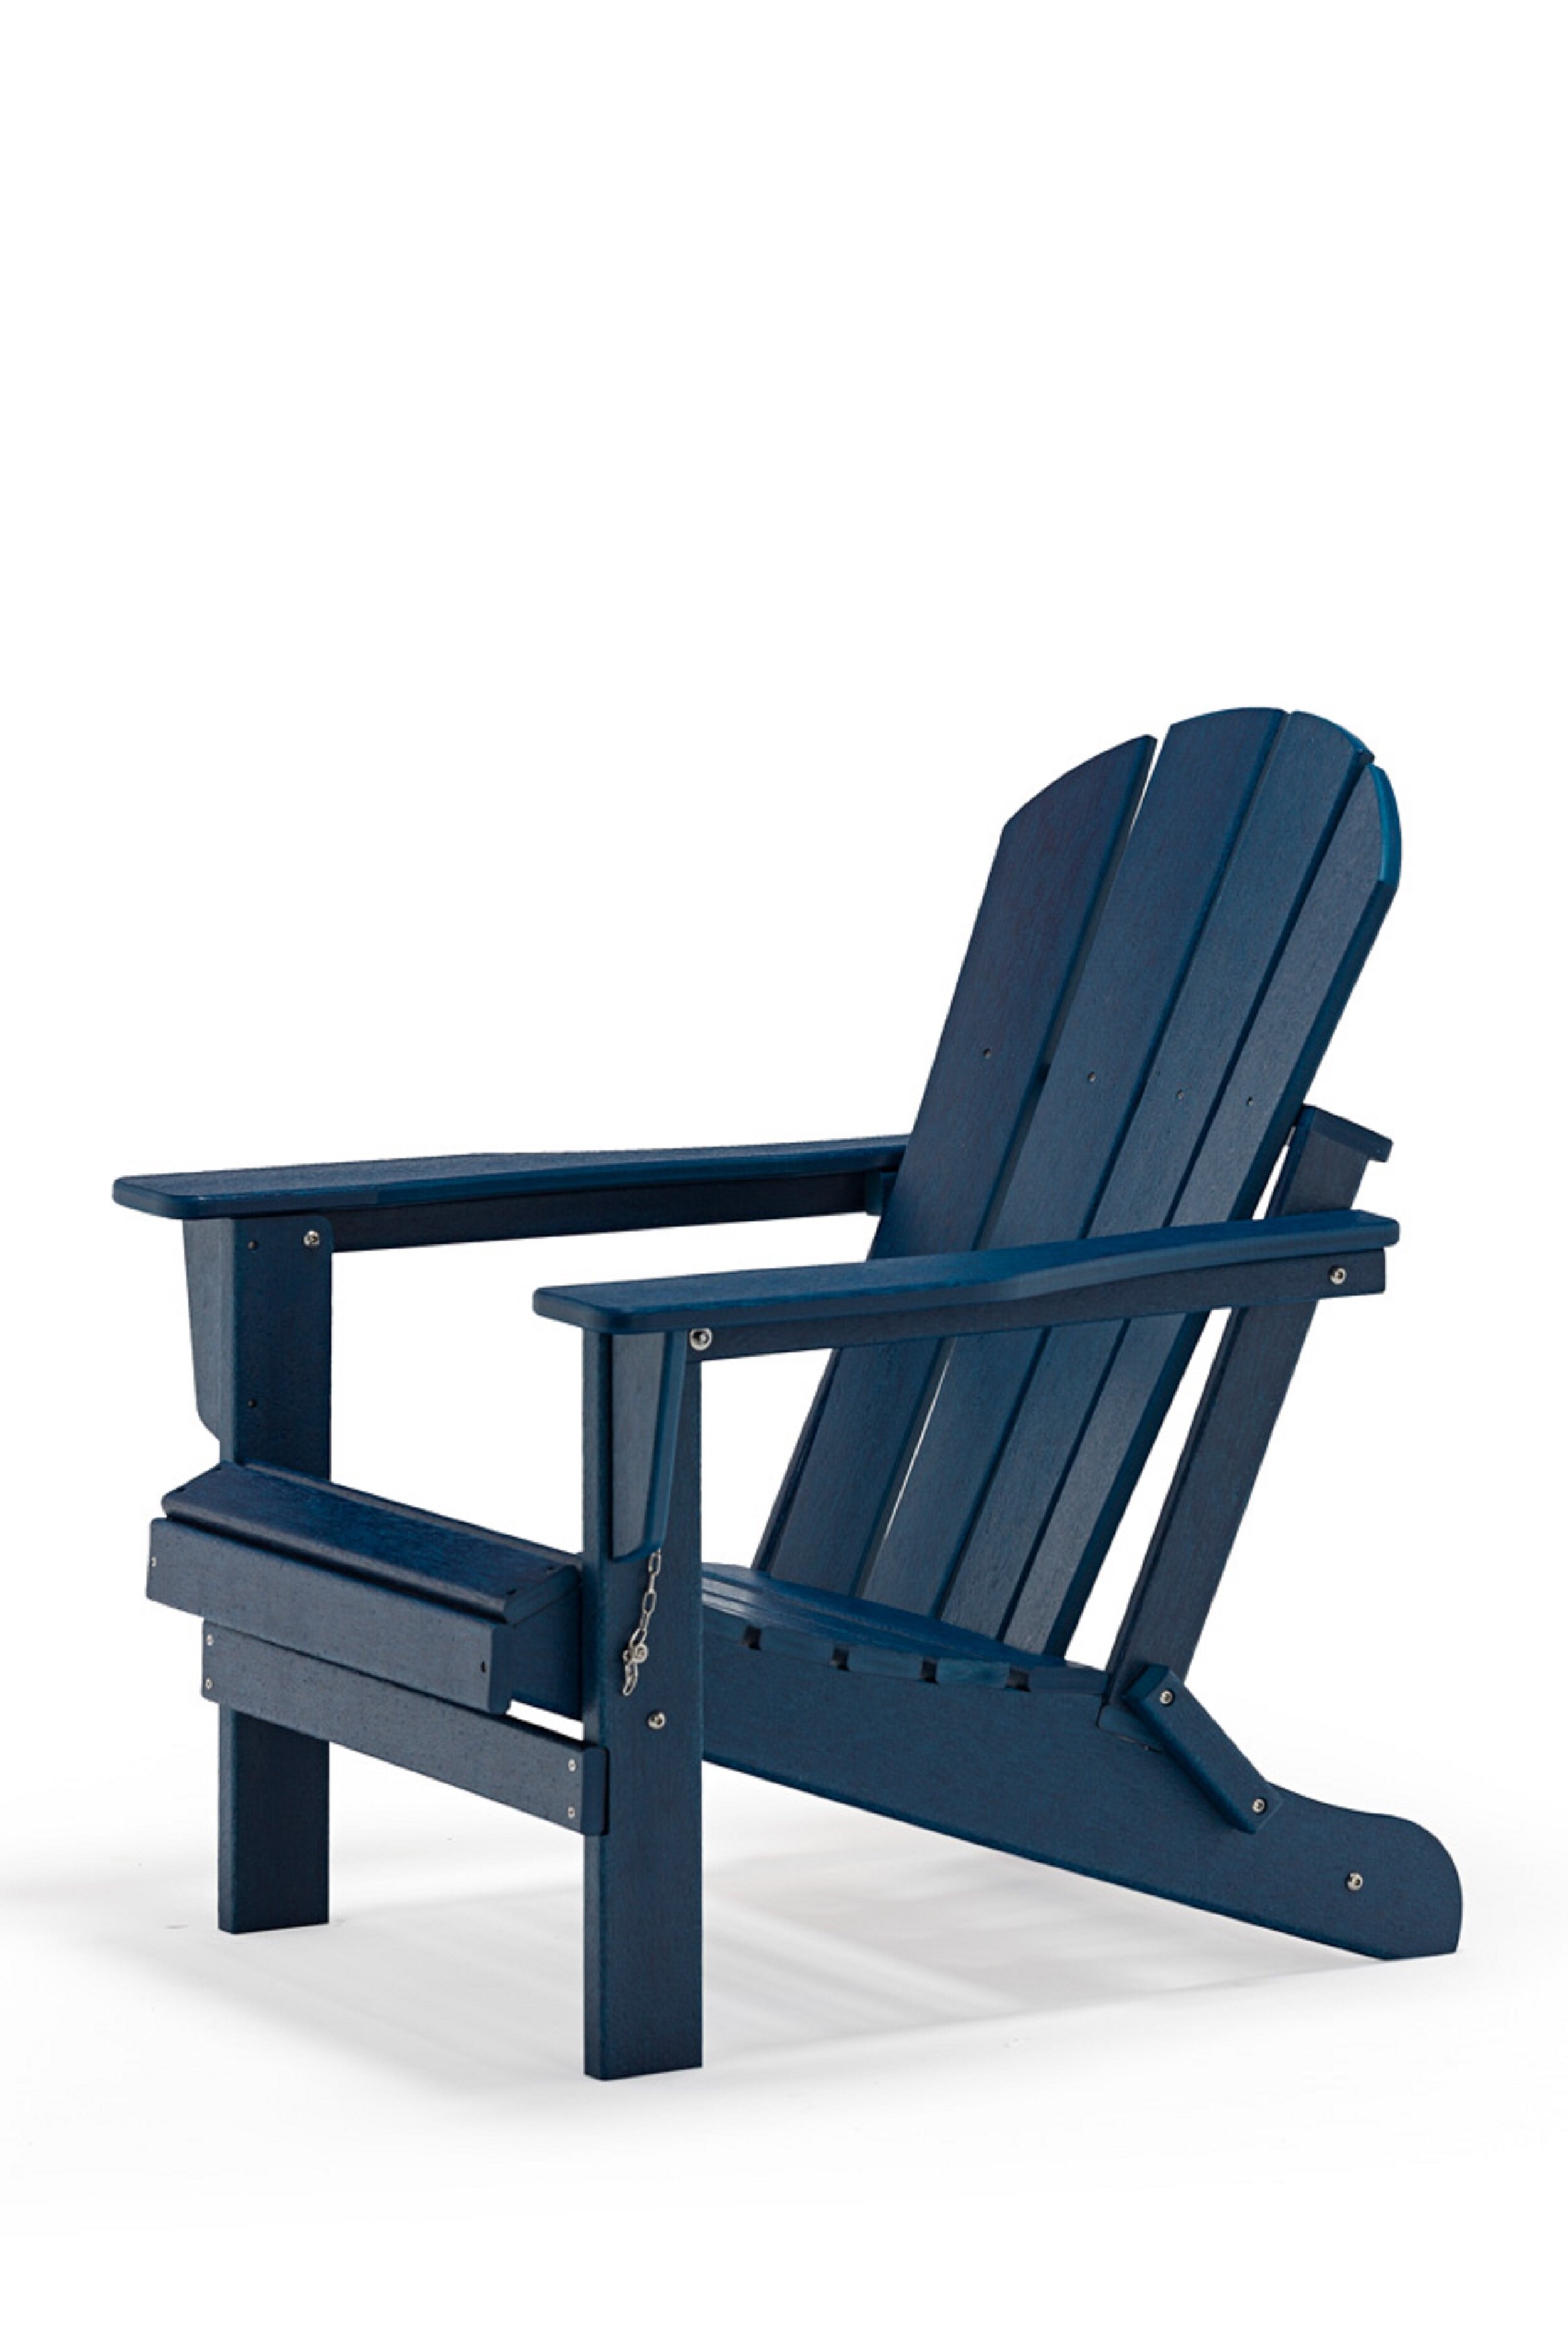 Aruba Blue Adirondack Chair with Flat Back Contemporary Patio Chairs Lawn Chair Outdoor Chairs Painted Weather Resistant 